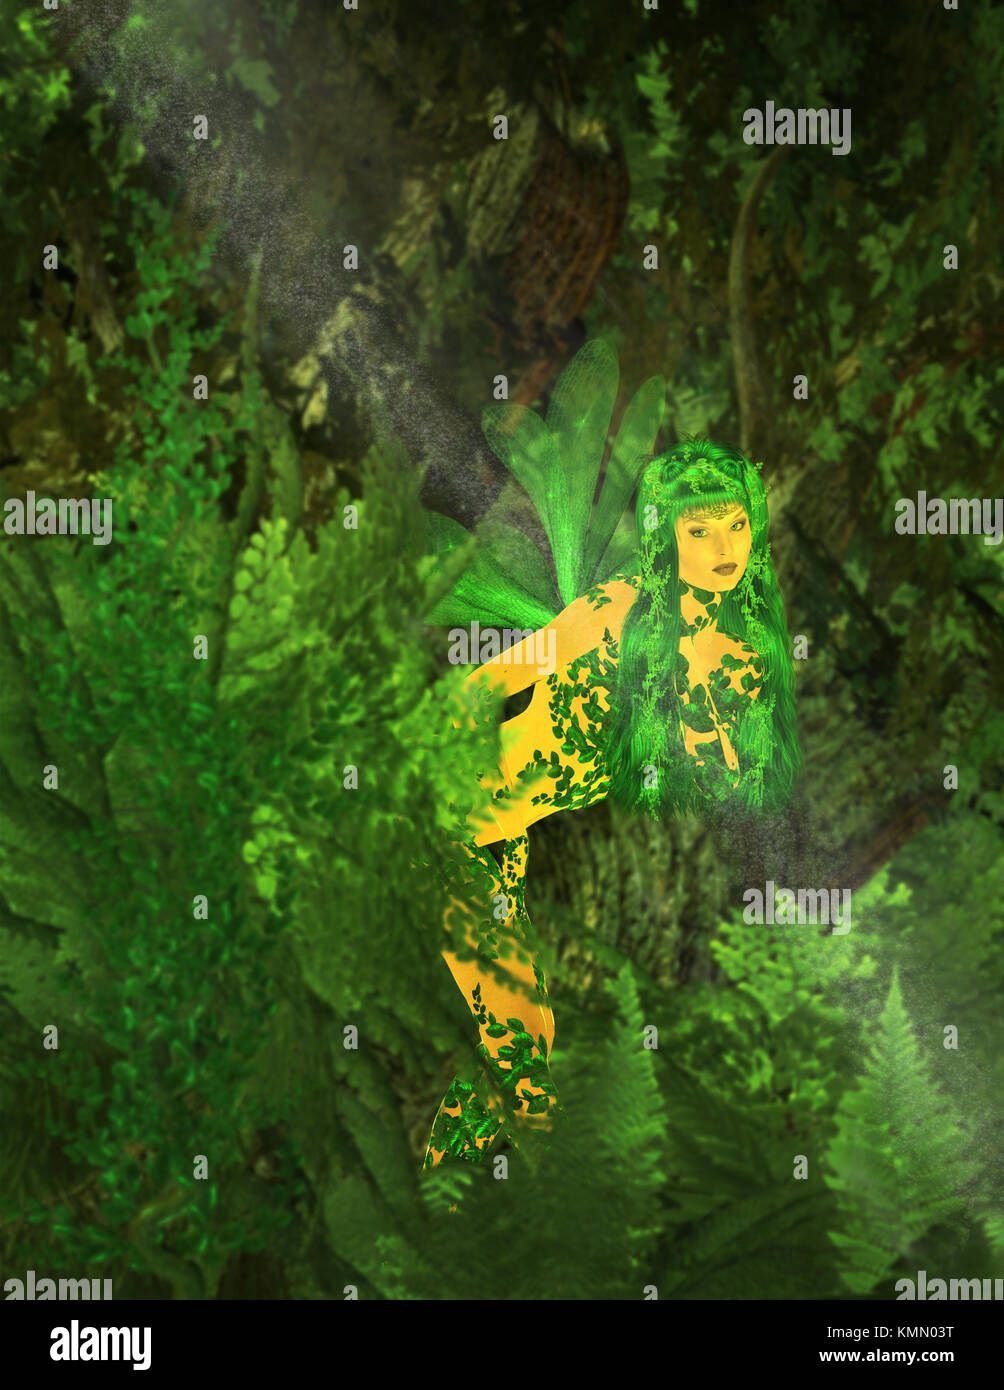 Green fairy standing in the forest Stock Photo - Alamy